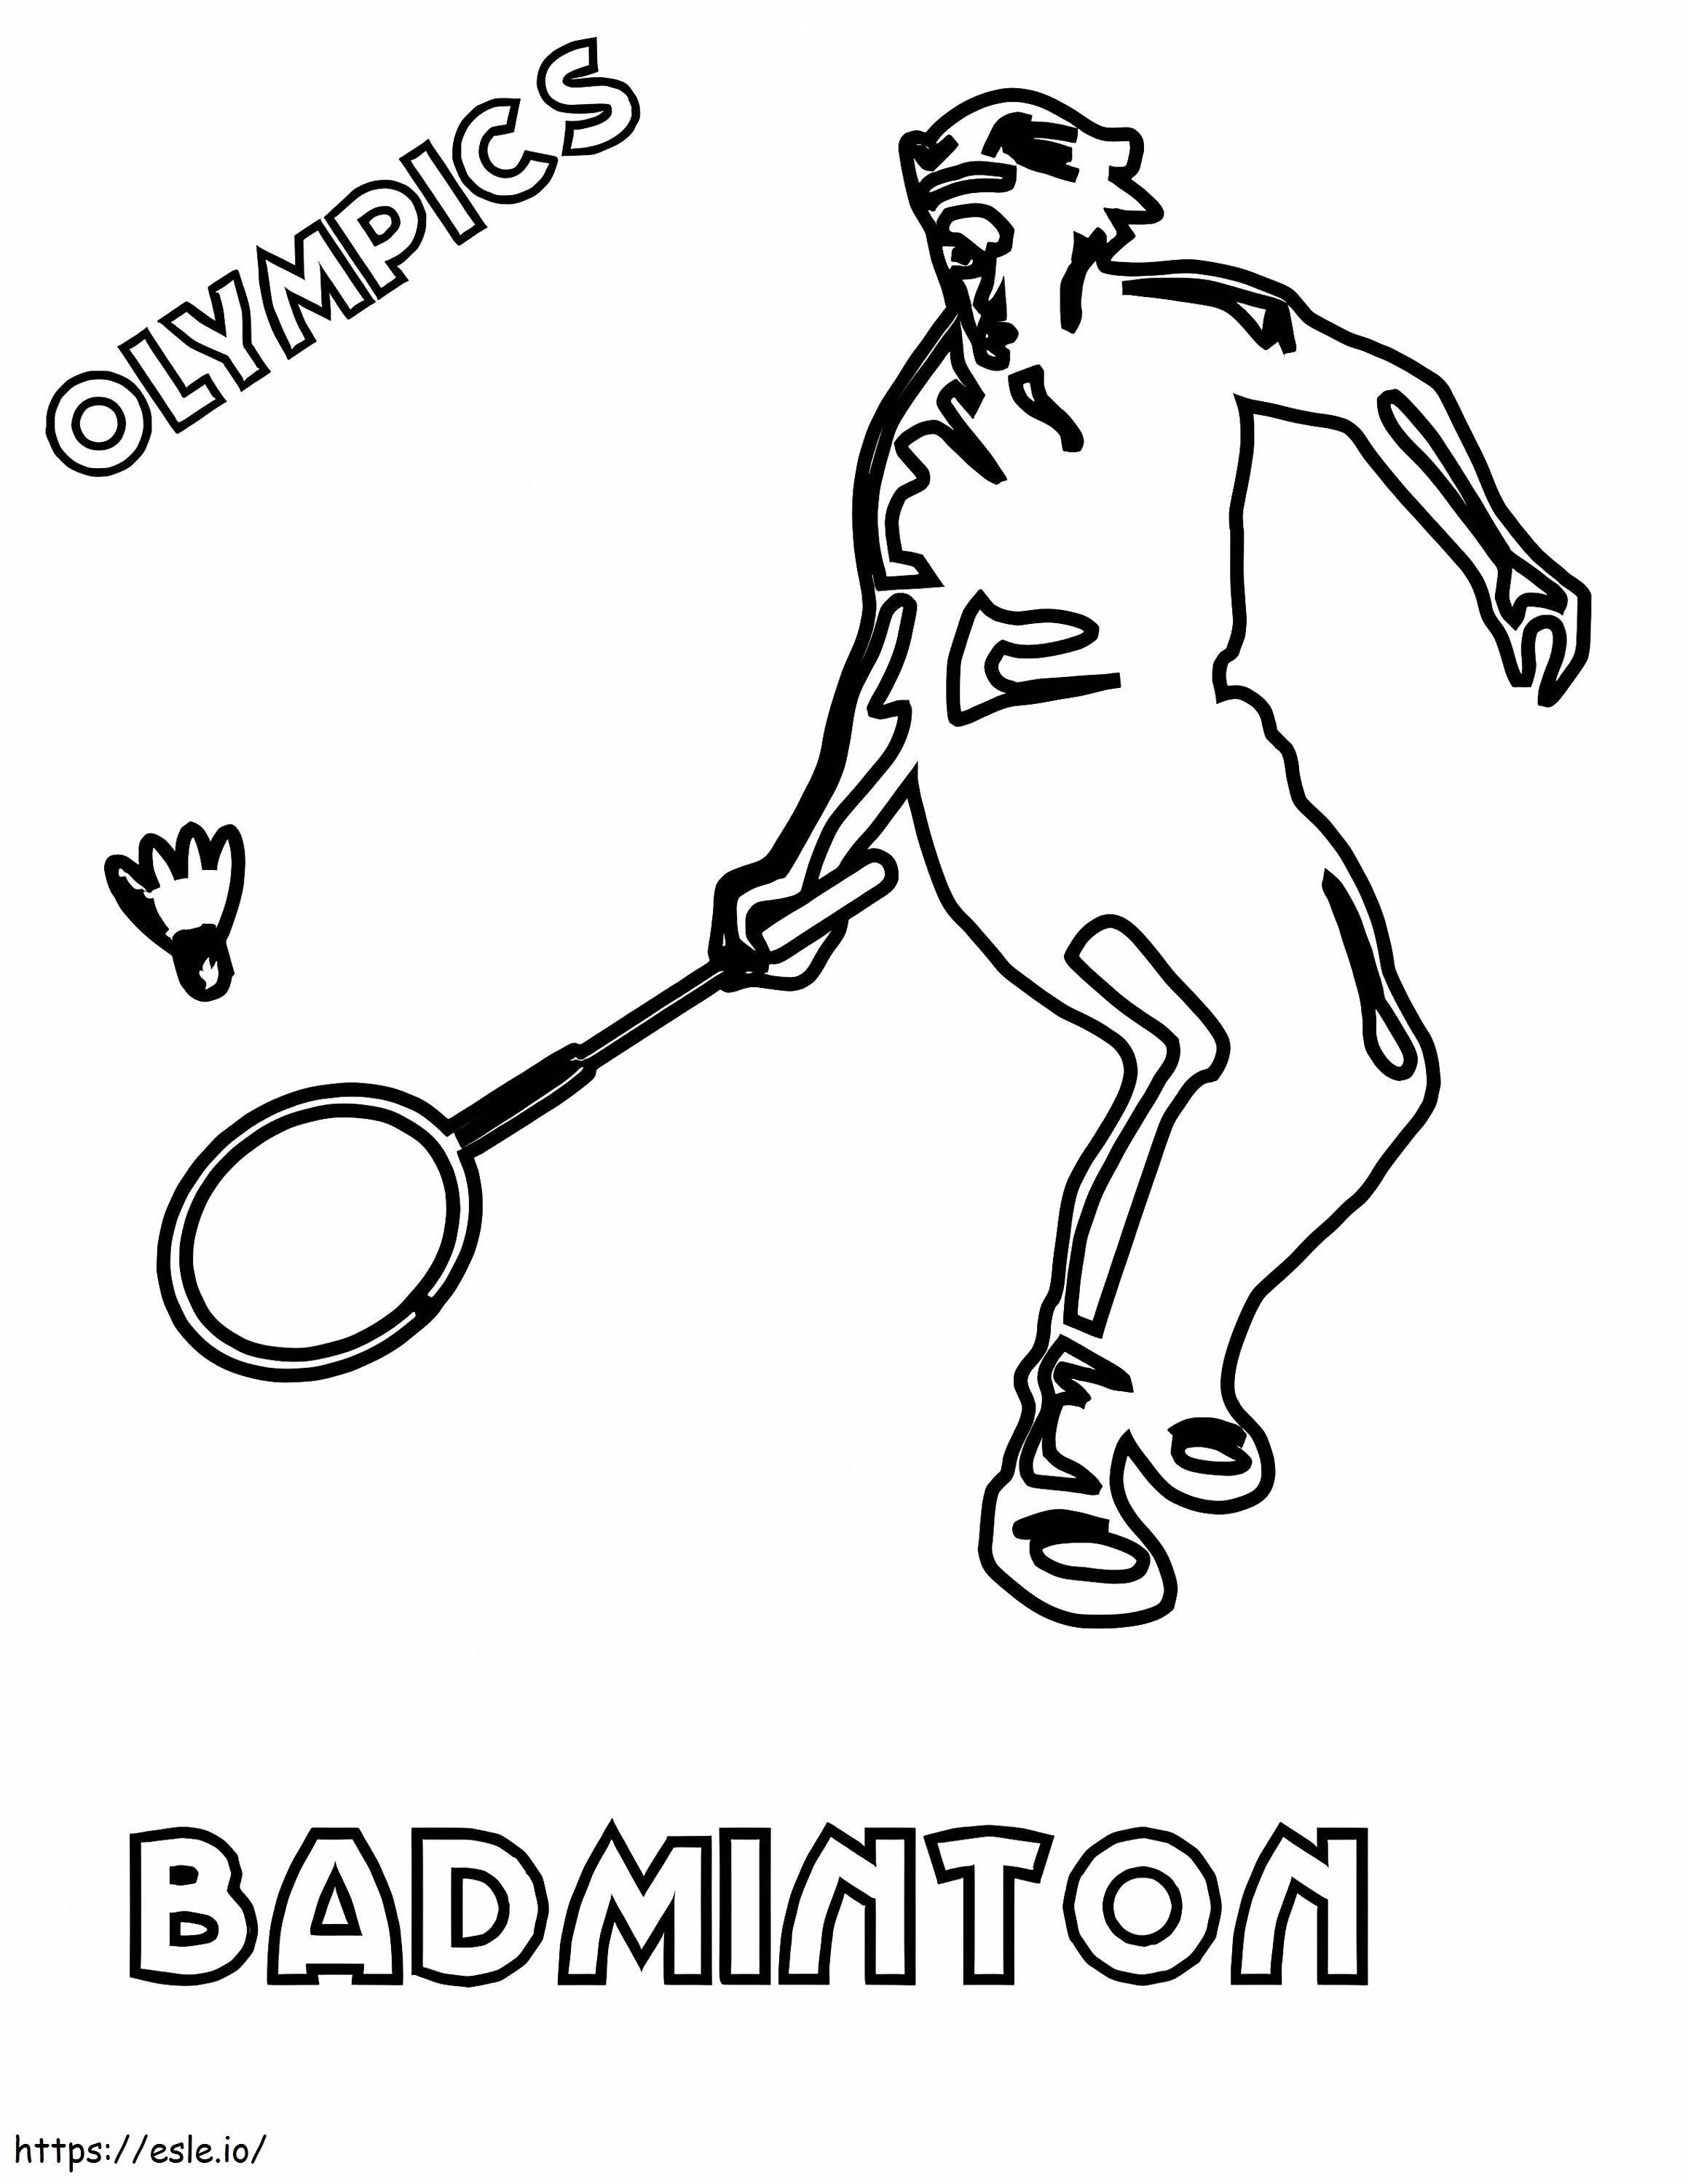 Olympics Badminton coloring page